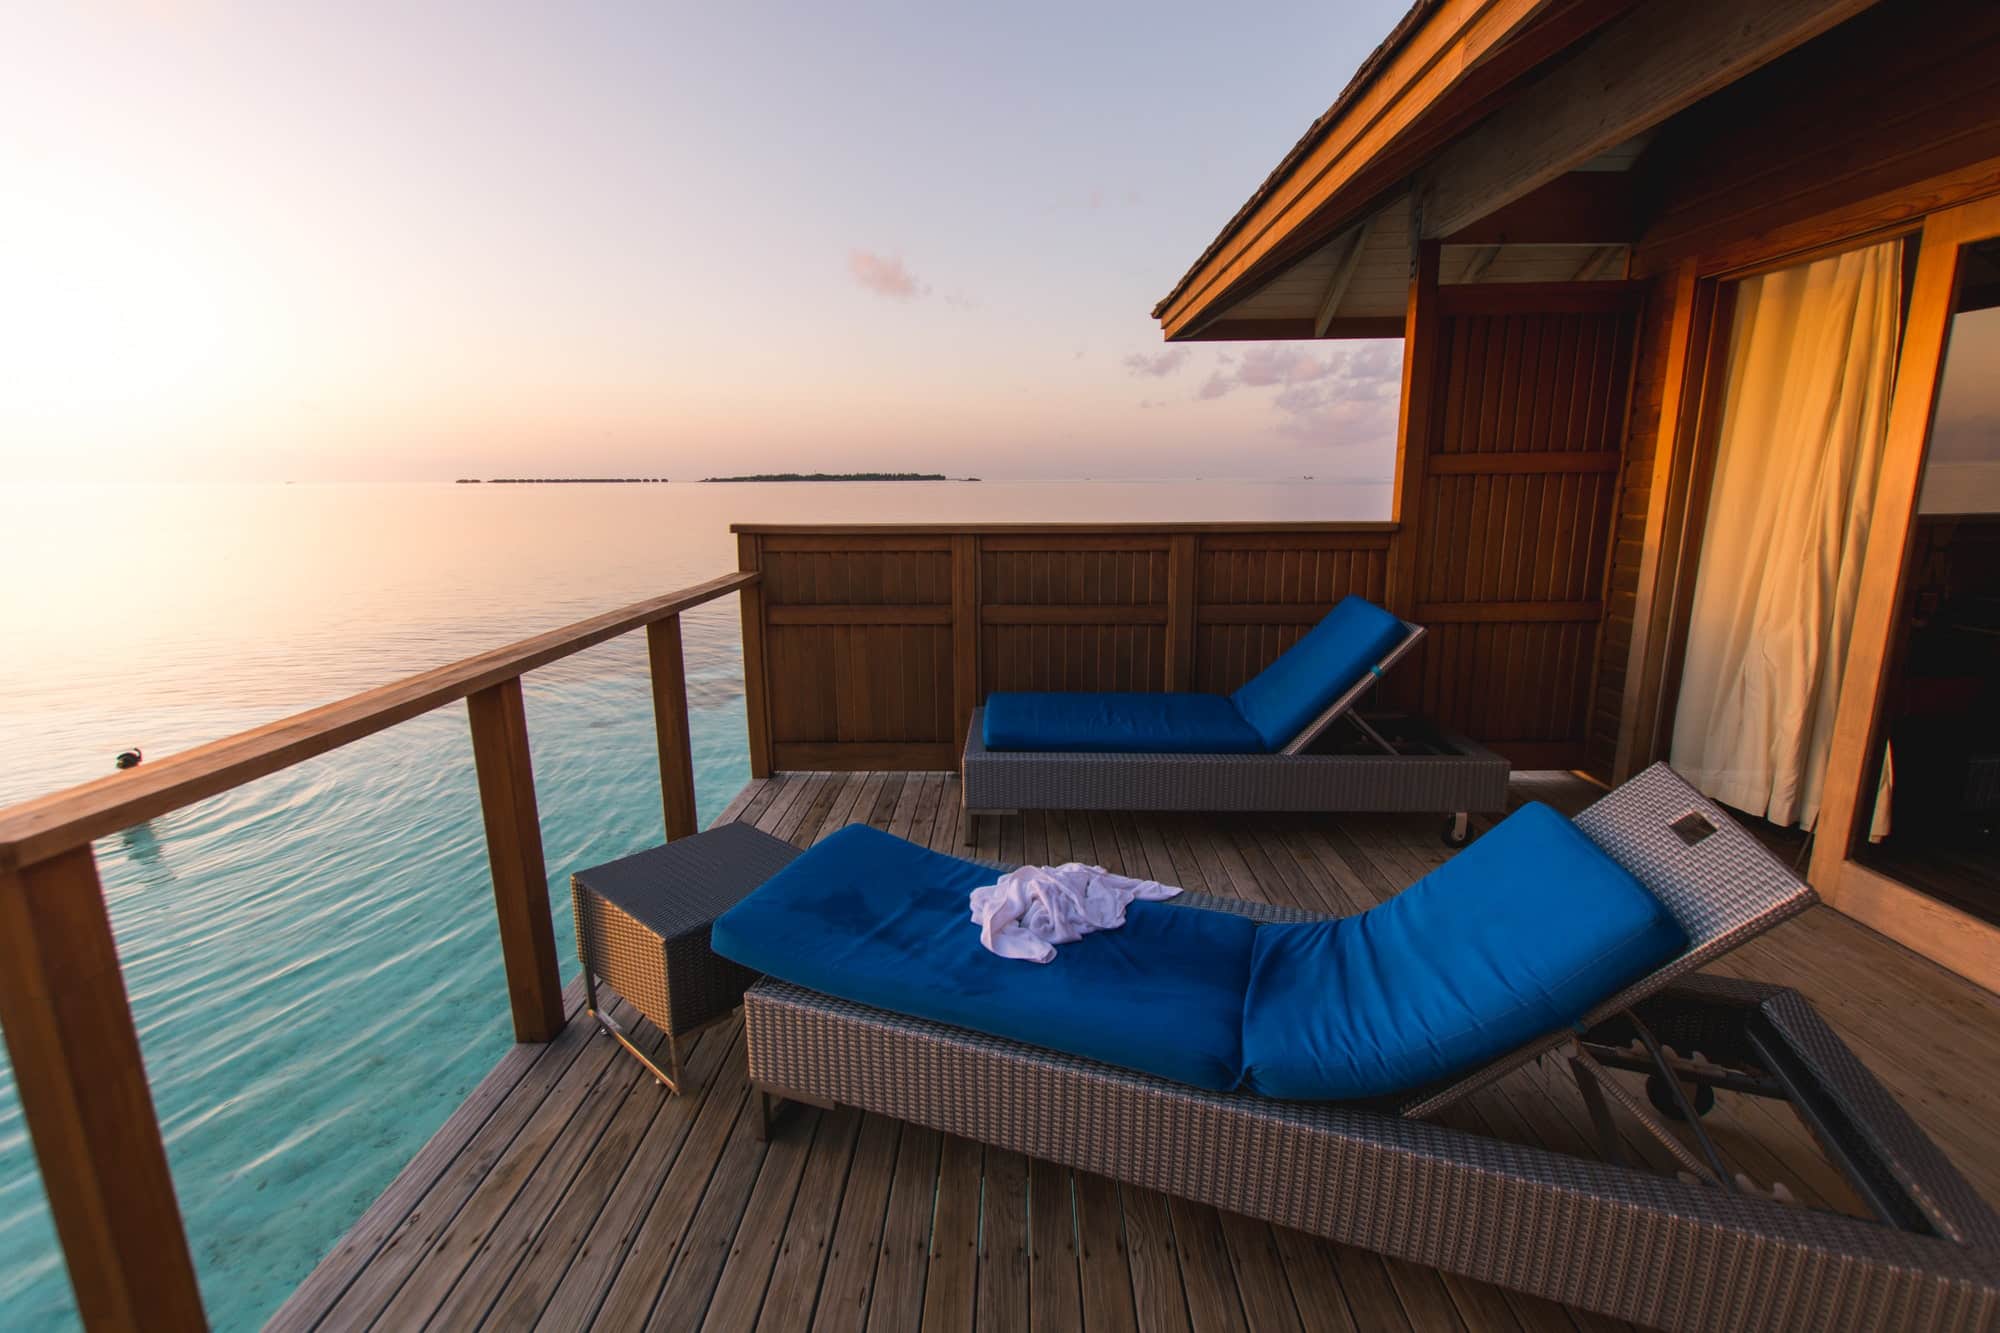 Beautiful tropical Maldives resort hotel and island with beach.